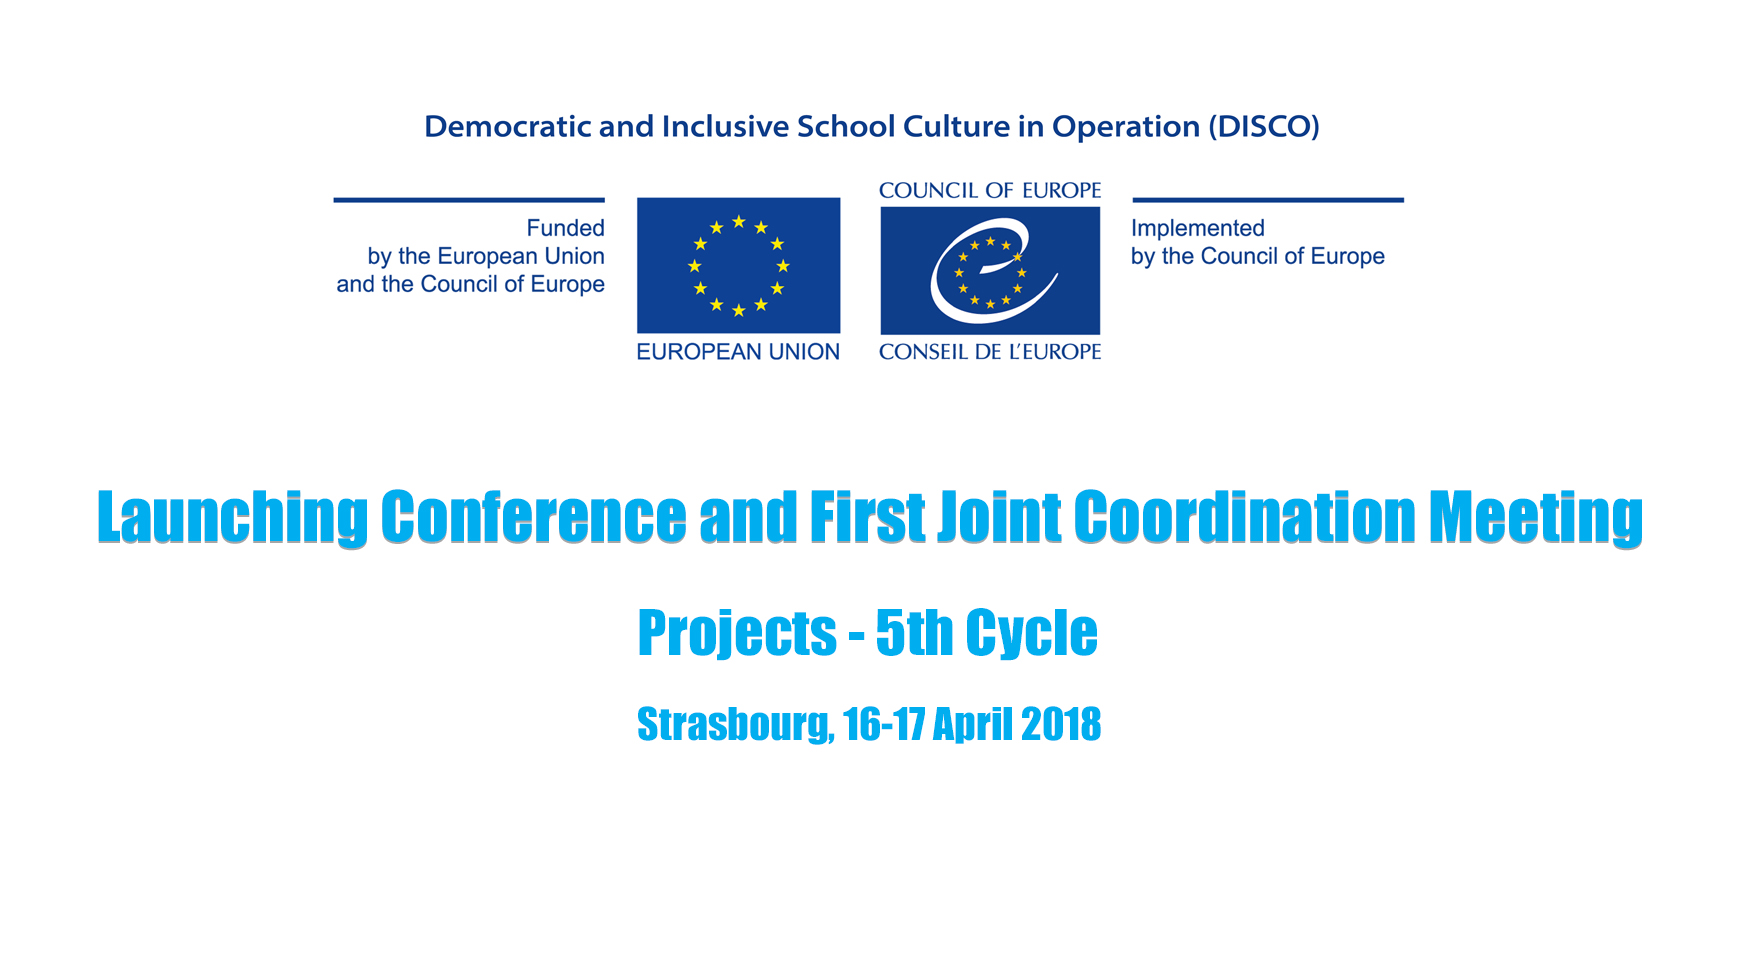 Launching Conference and First Joint Coordination Meeting - Projects 5th Cycle